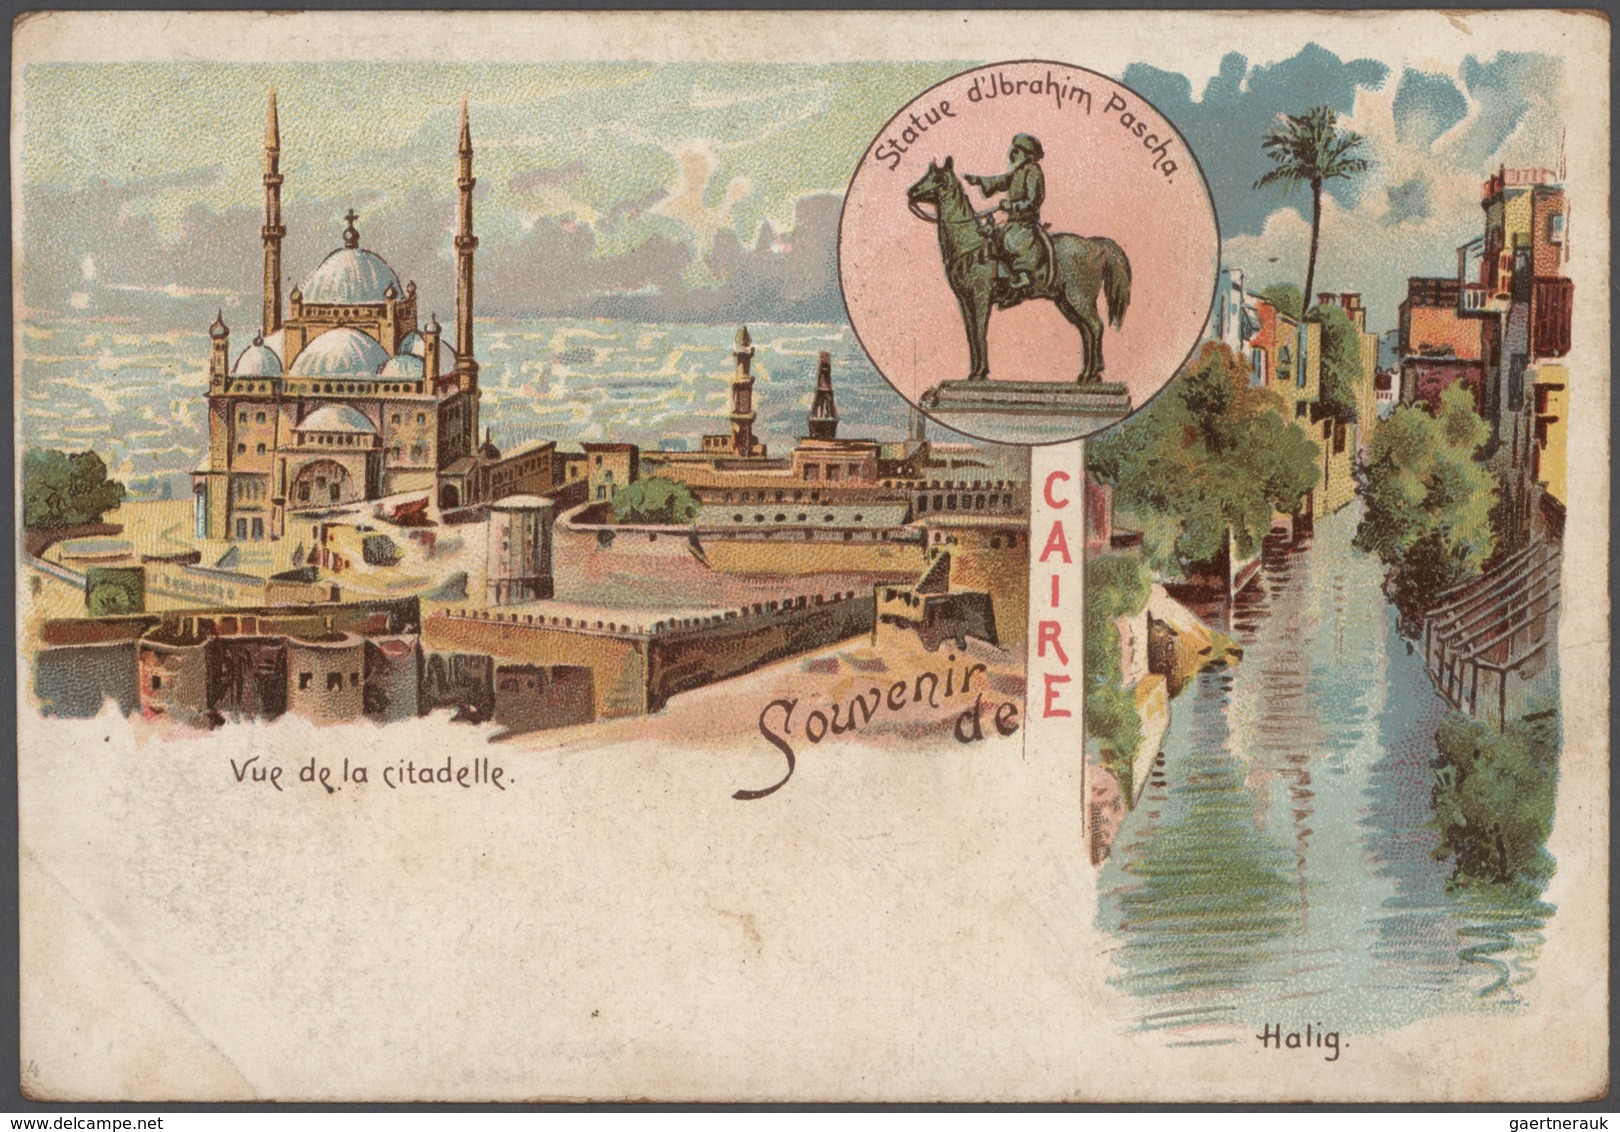 Ägypten: 1890's-1910's ca.: More than 100 PICTURE POSTCARDS from Egypt, mostly used, plus some used